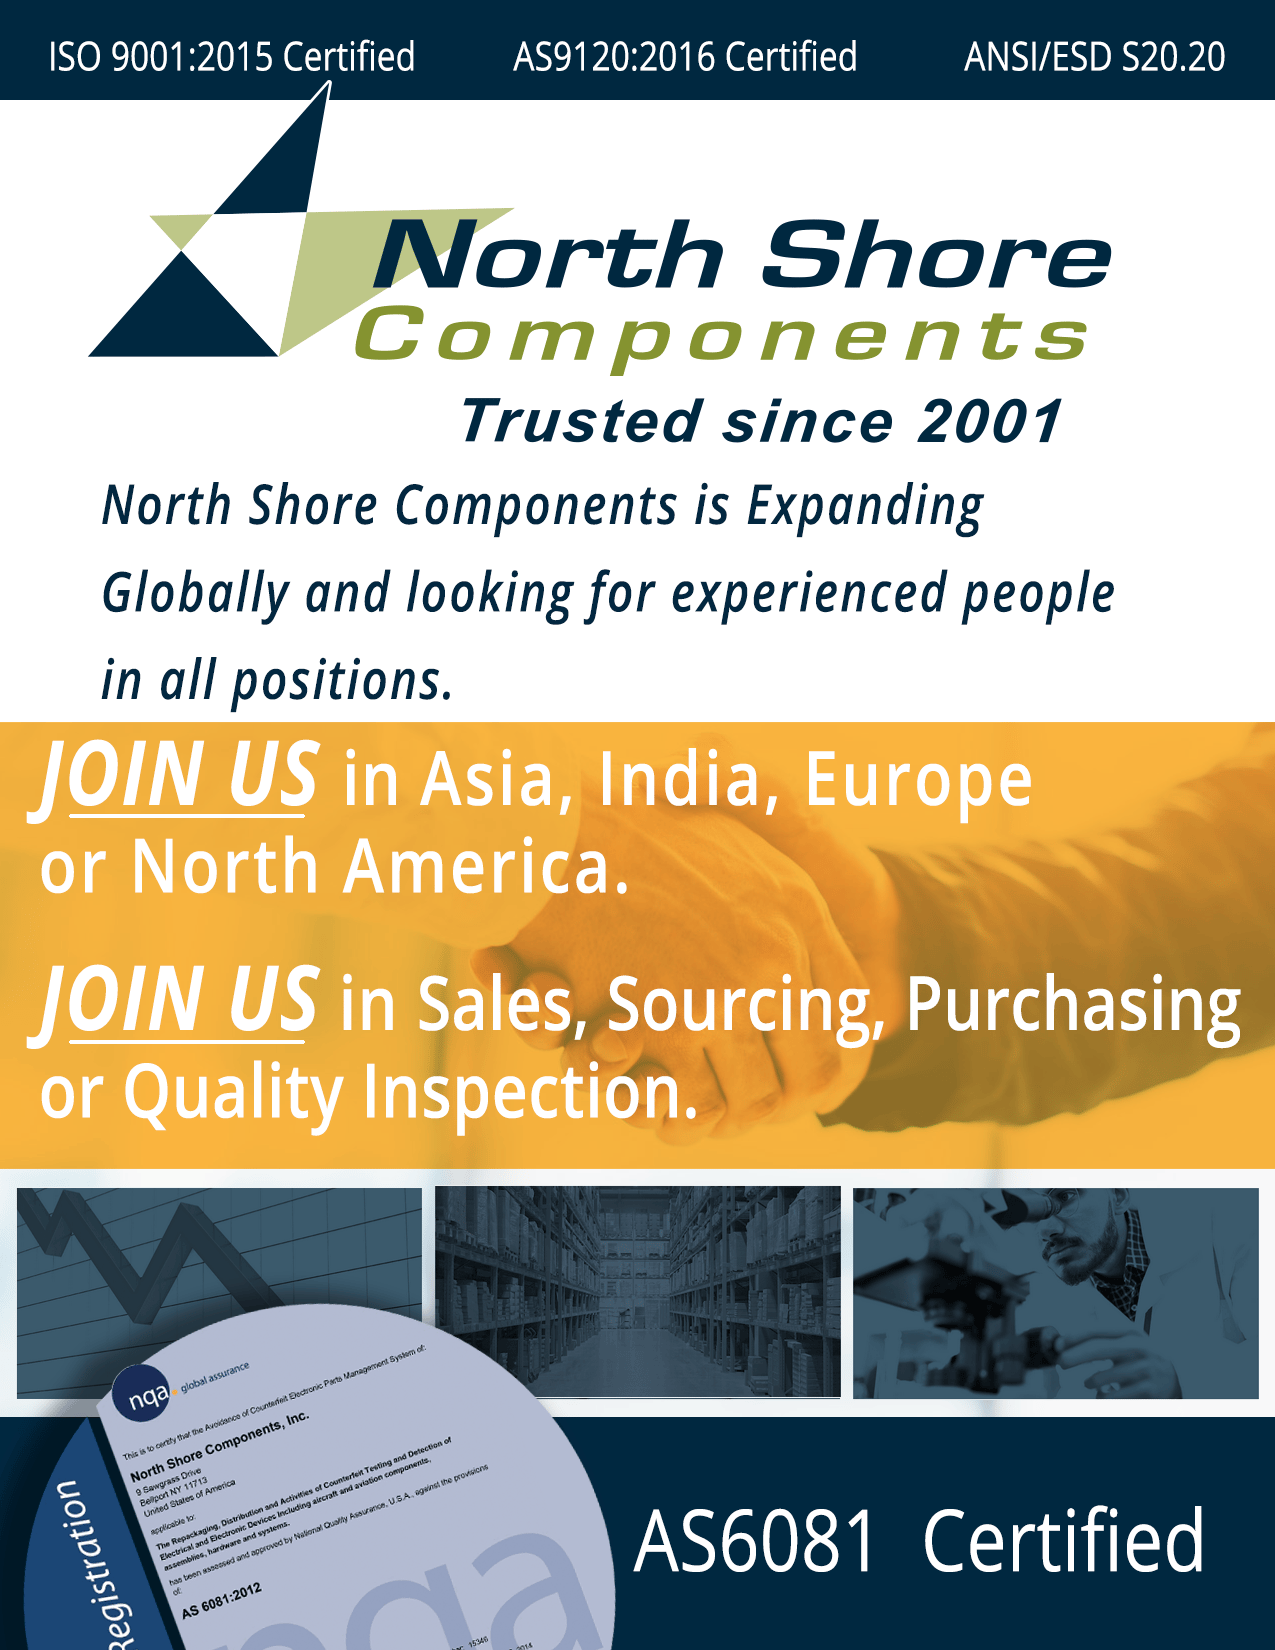 North Shore Components is Expanding  Globally and looking for experienced people  in all positions. JOIN US in Asia, India, Europe  or North America.  JOIN US in Sales, Sourcing, Purchasing or Quality Inspection.